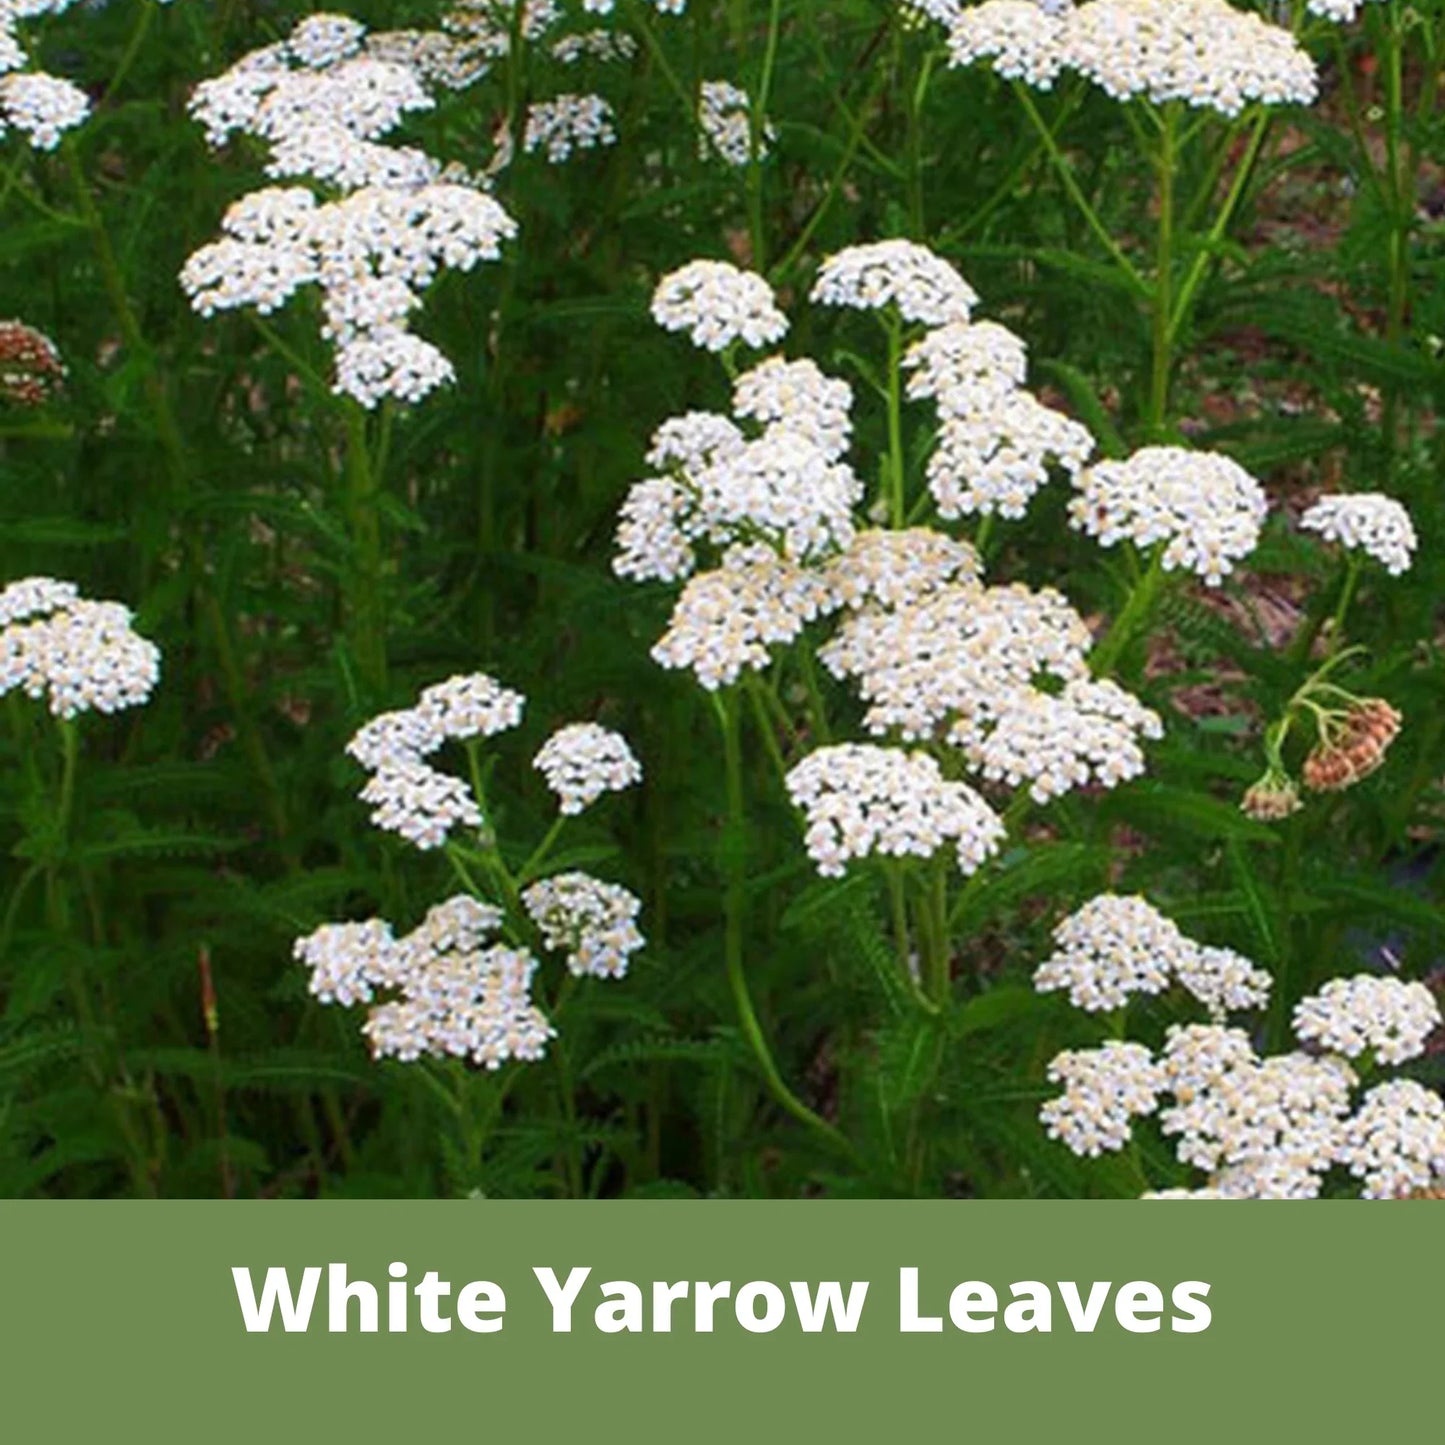 Bee Lawn Single Species Seed - White Yarrow (Midwest Native) - 250 sq ft